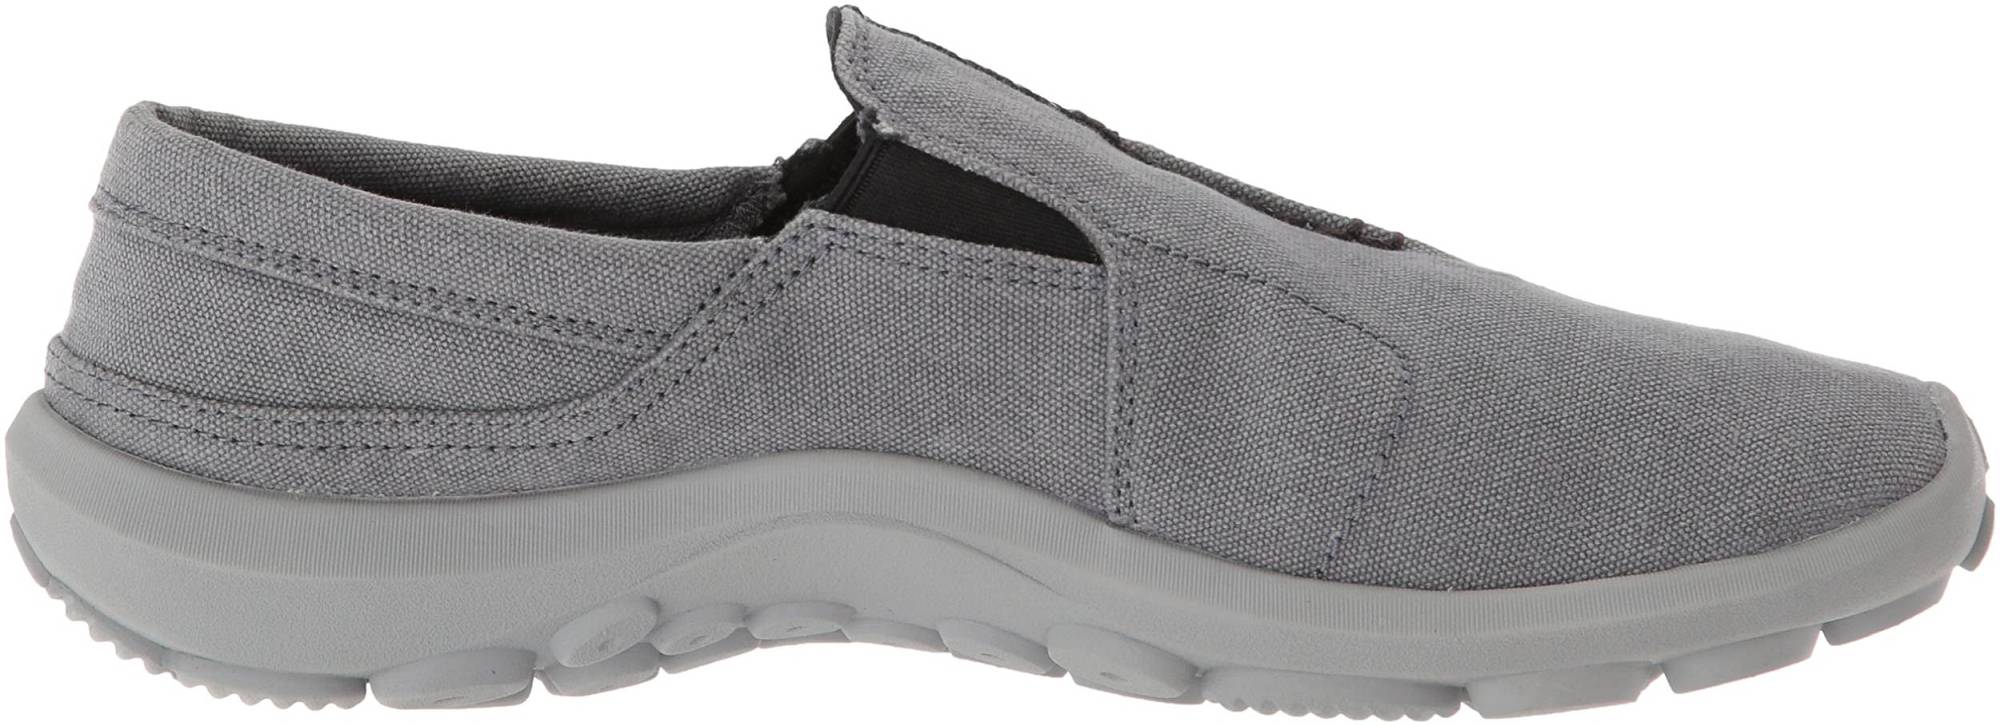 Merrell Jungle Ayers Moc – Shoes Reviews & Reasons To Buy